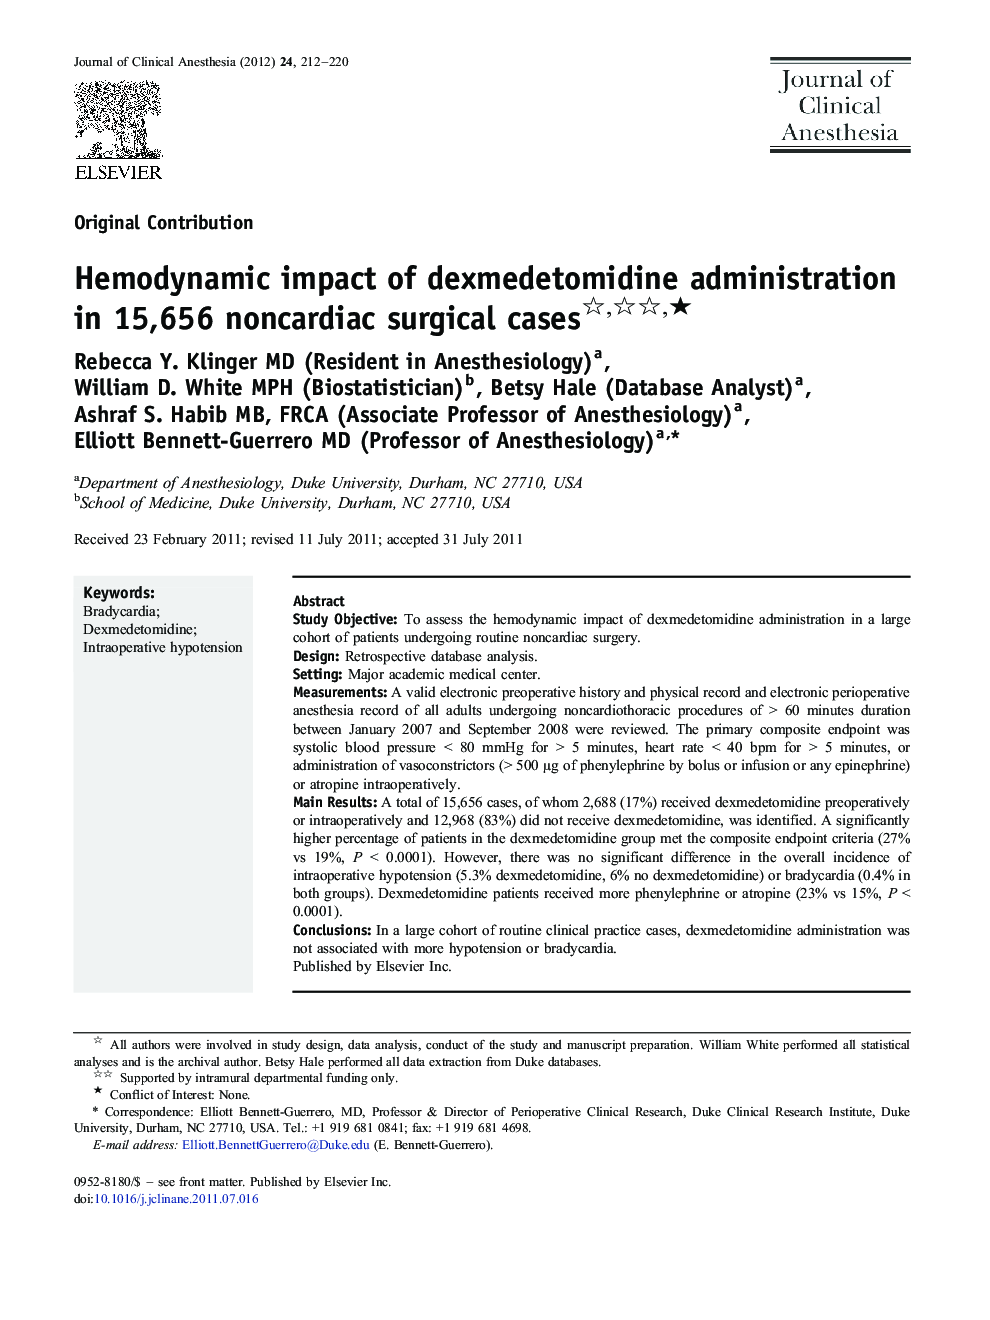 Hemodynamic impact of dexmedetomidine administration in 15,656 noncardiac surgical cases ★